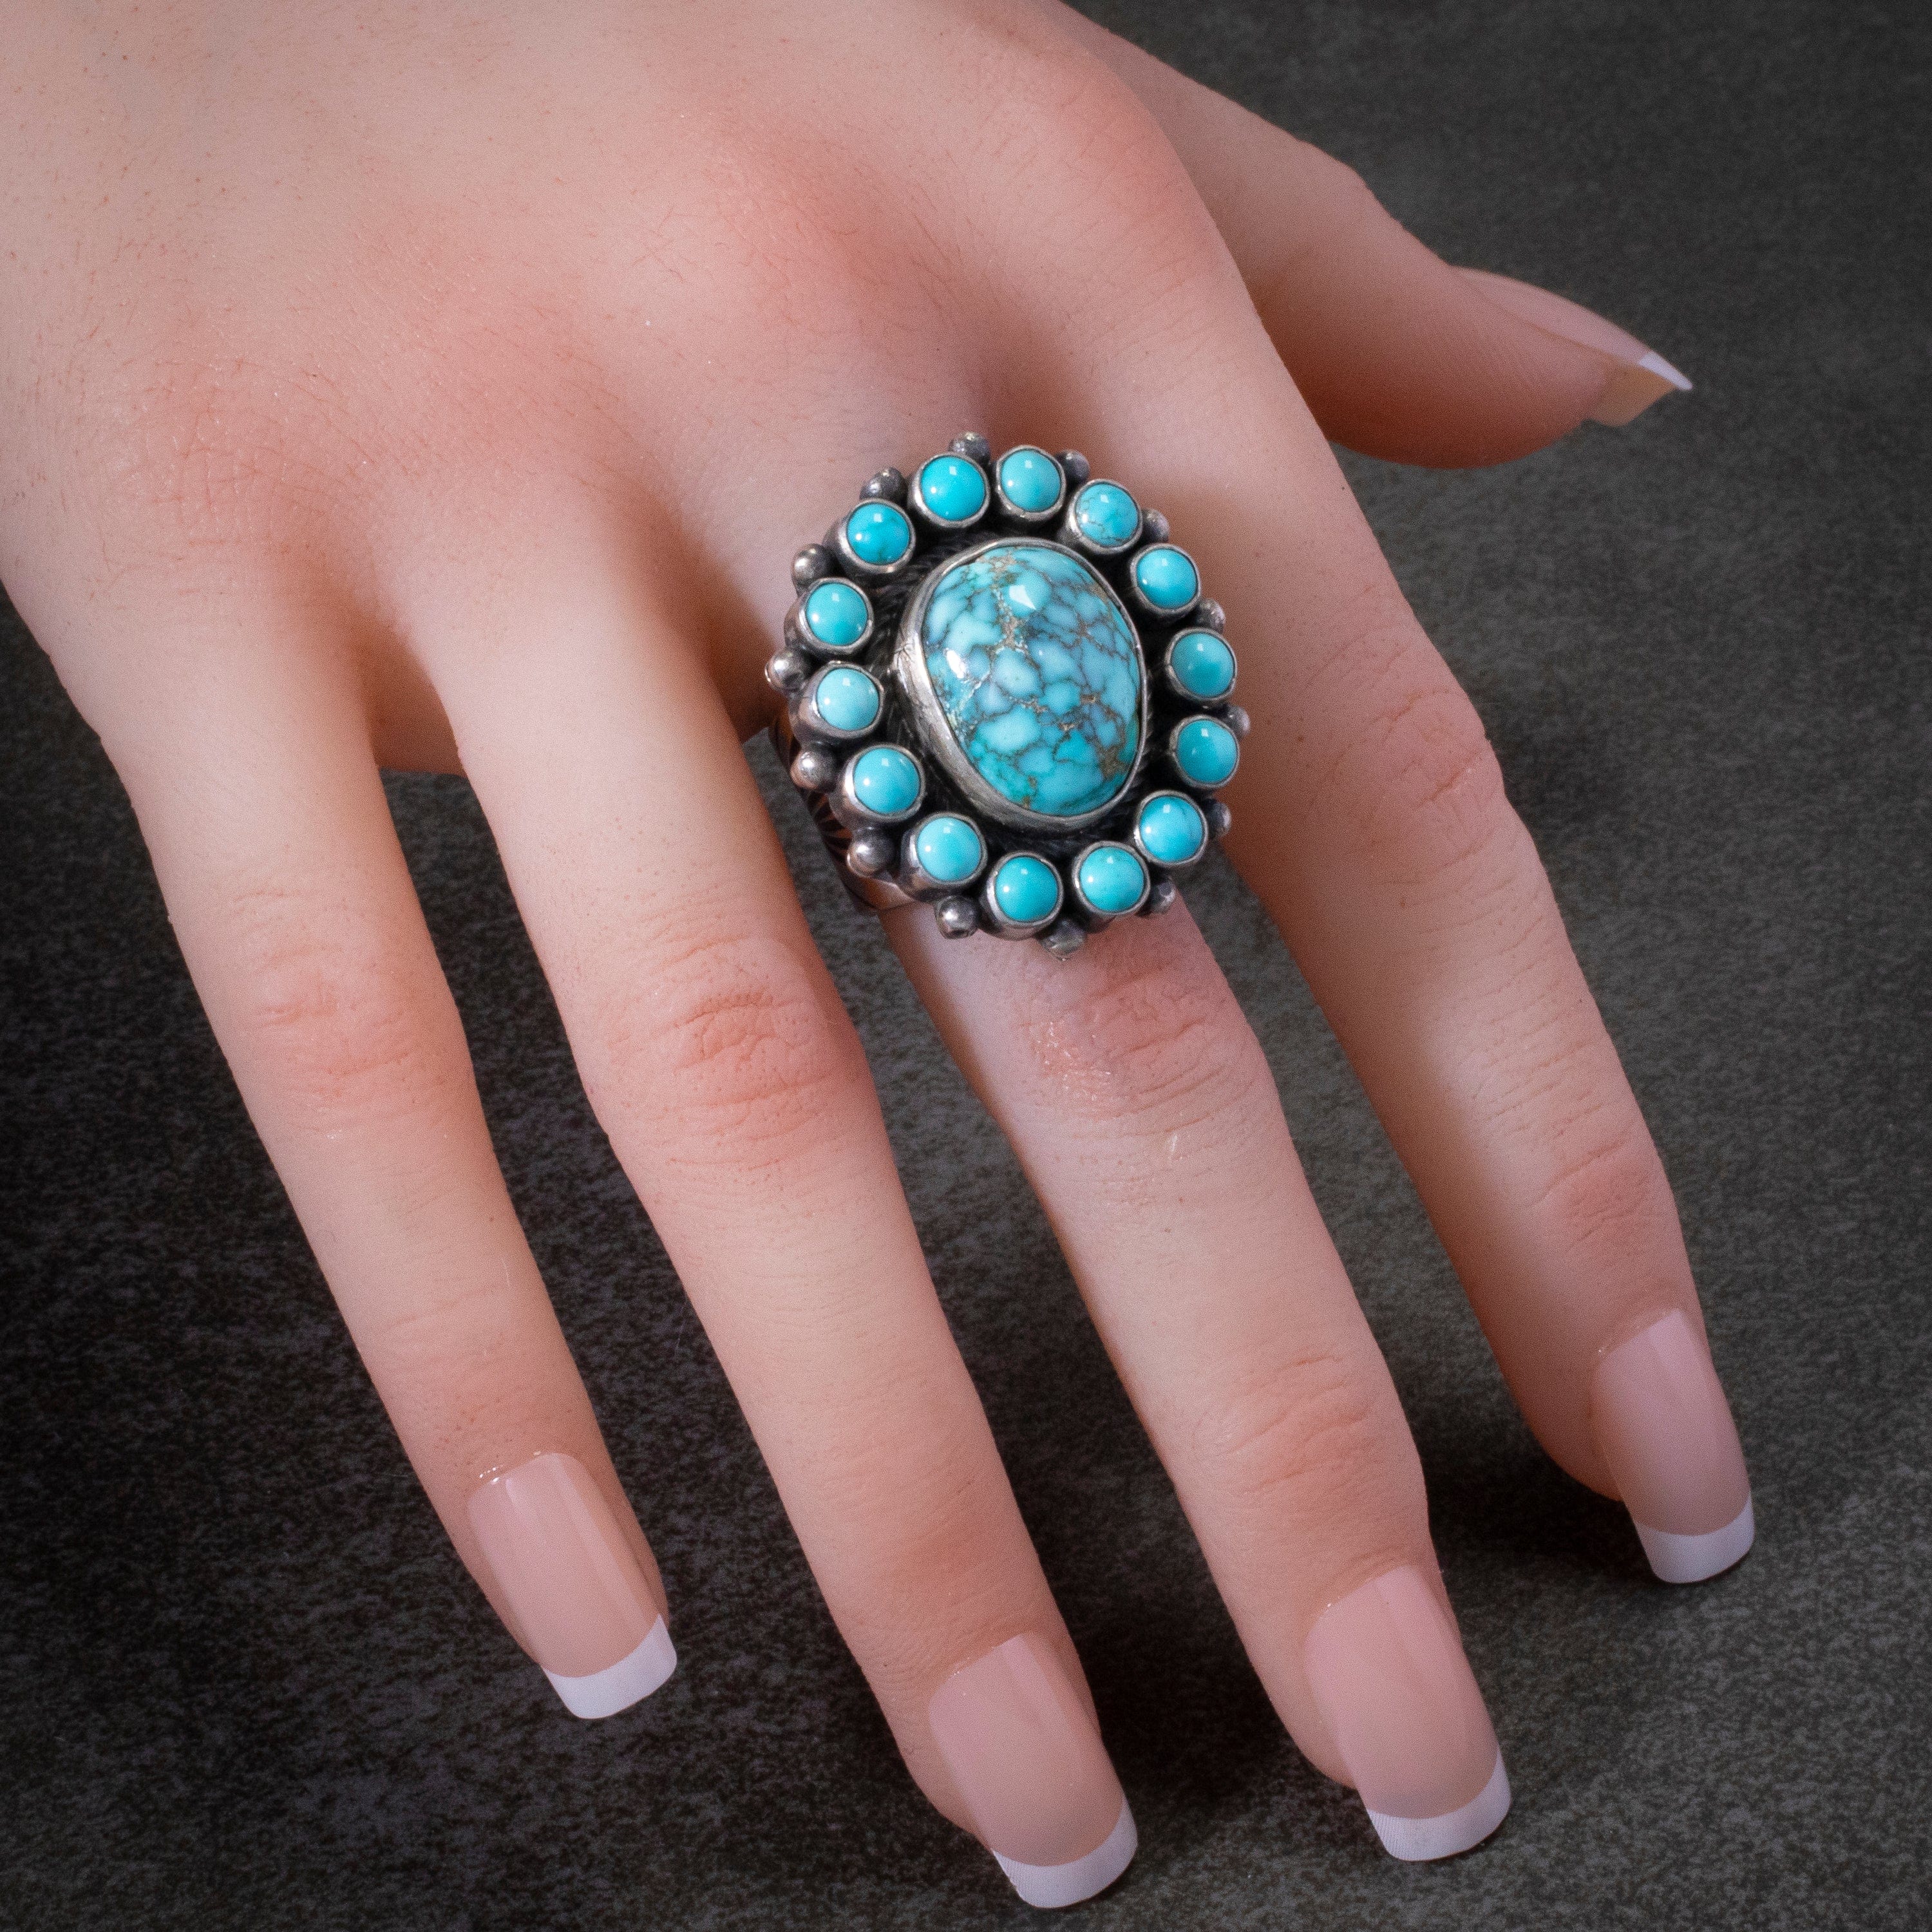 Kalifano Native American Jewelry 7 Paul Livingston Carico Lake Turquoise and Campitos Turquoise USA Native American Made 925 Sterling Silver Ring NAR2400.010.7